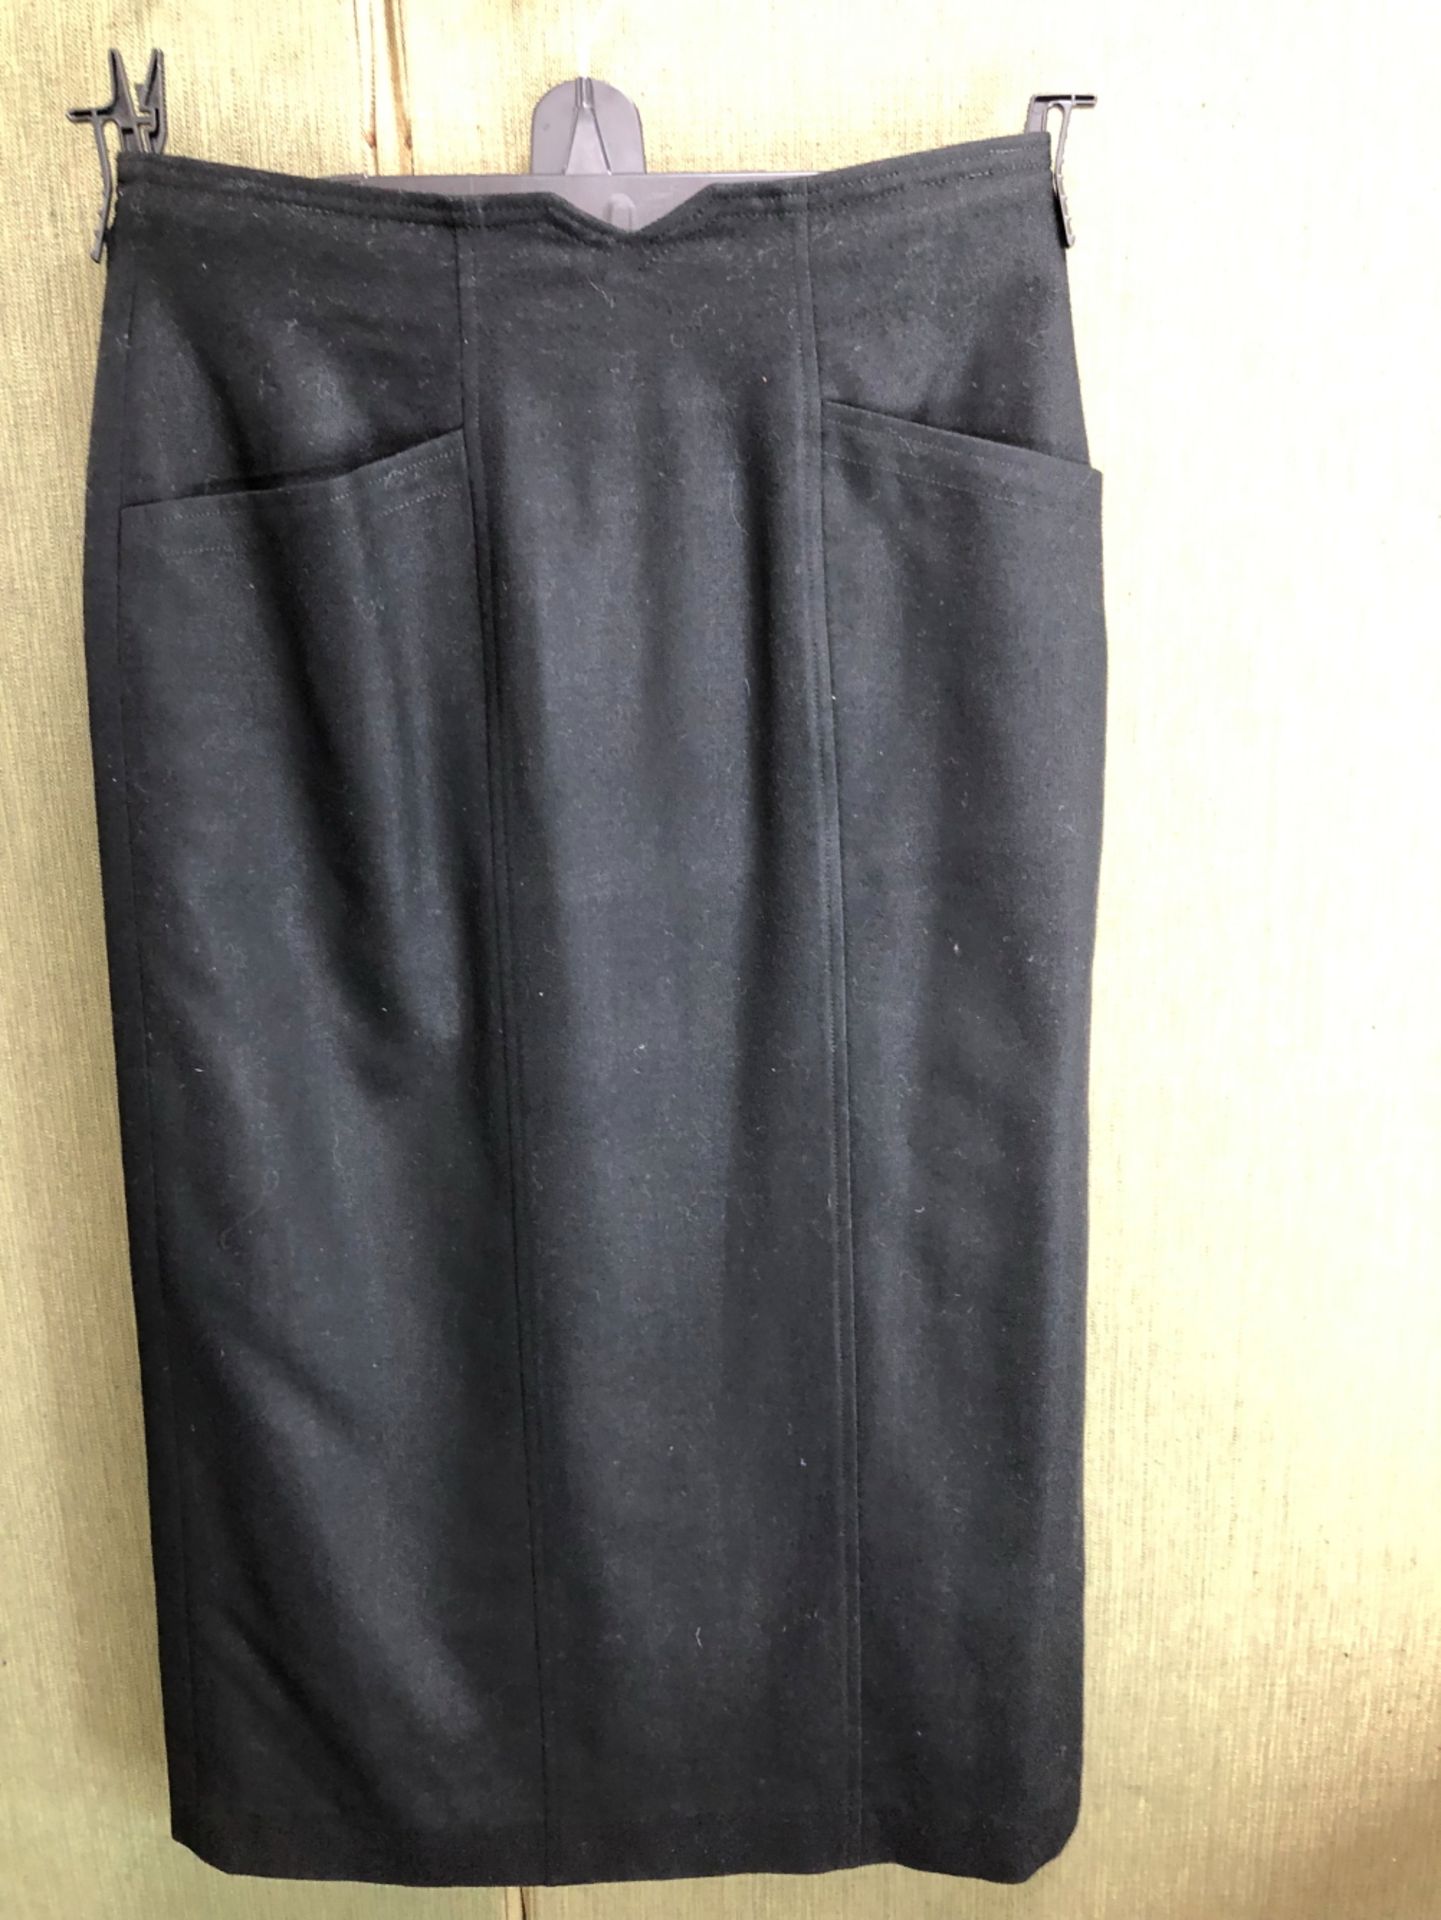 A LOUIS FERAUD BLACK WOOL SKIRT, A PAIR OF CATHERINA HEPFER GREEN TROUSERS SIZE 38, A PLEATED - Image 11 of 18